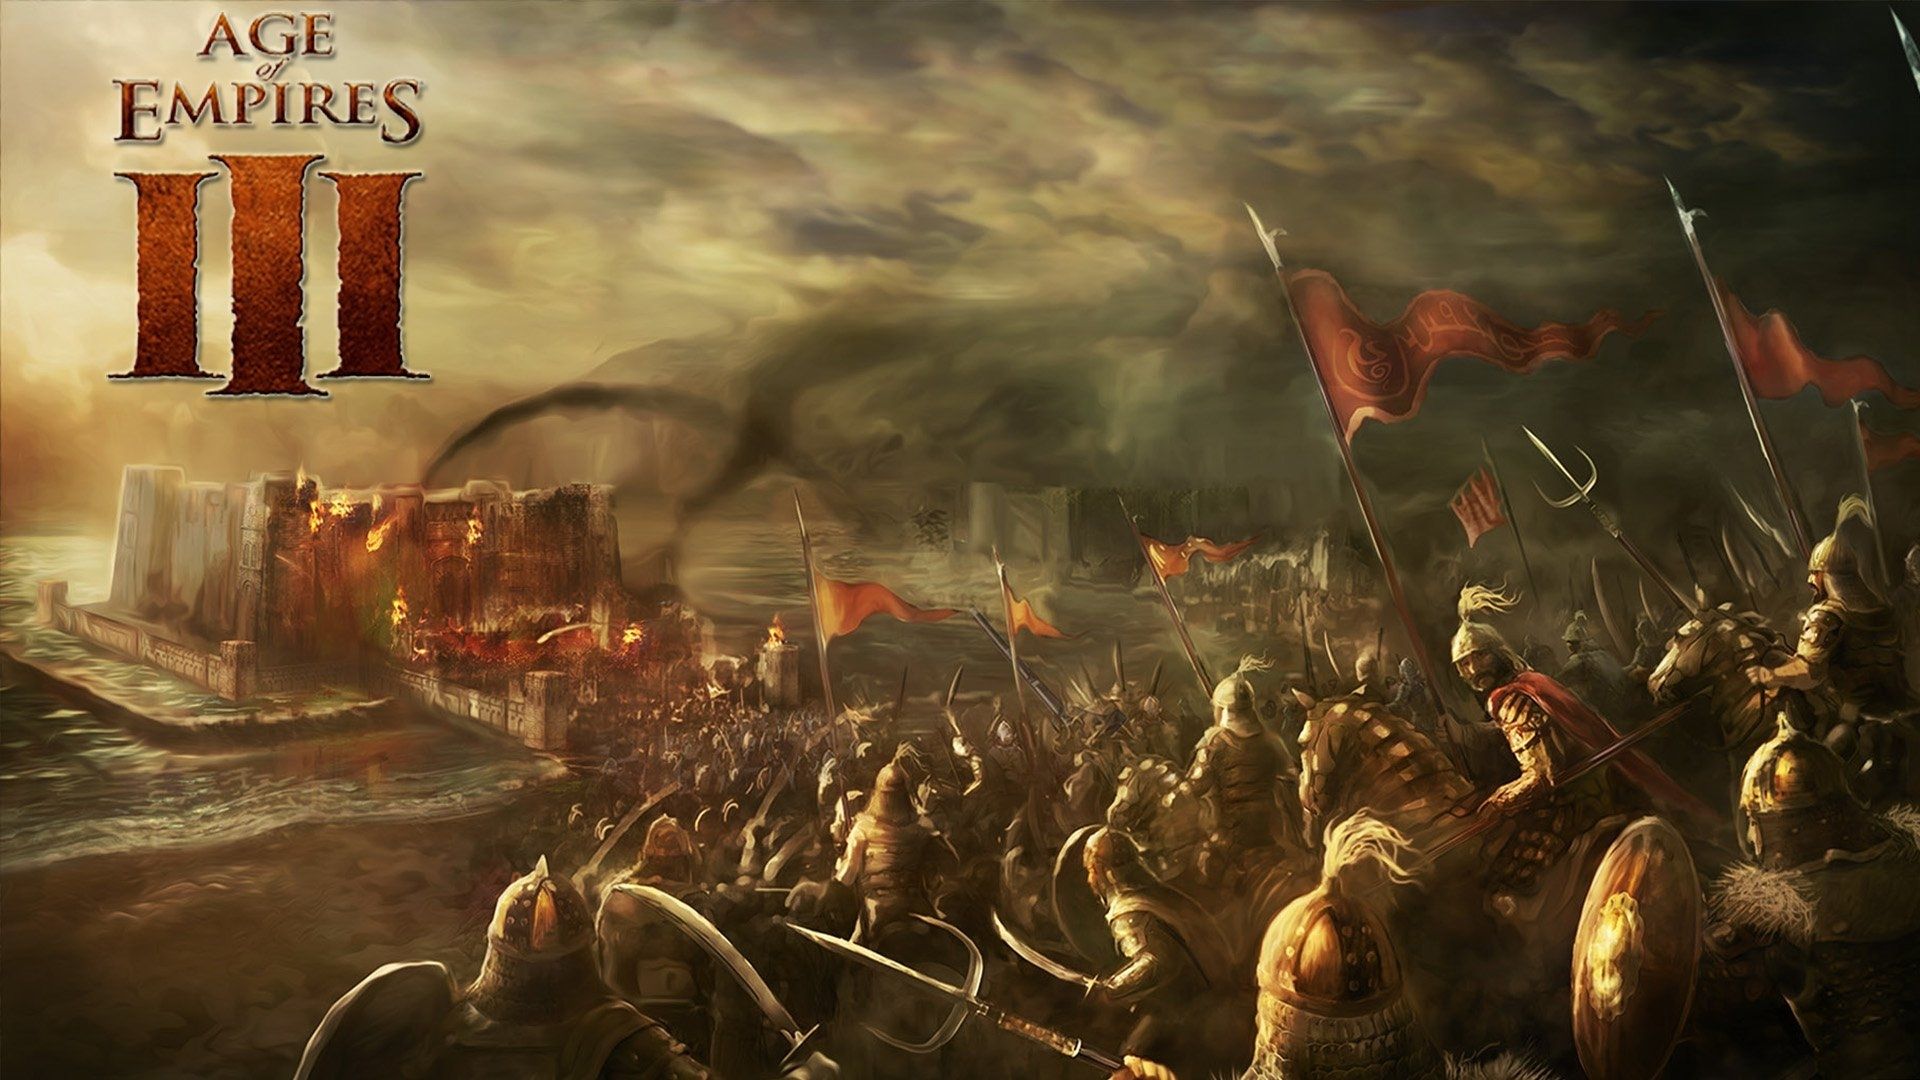 Latest Age Of Empires Wallpaper FULL HD 1080p For PC Background. Age of empires iii, Age of empires, Empire wallpaper